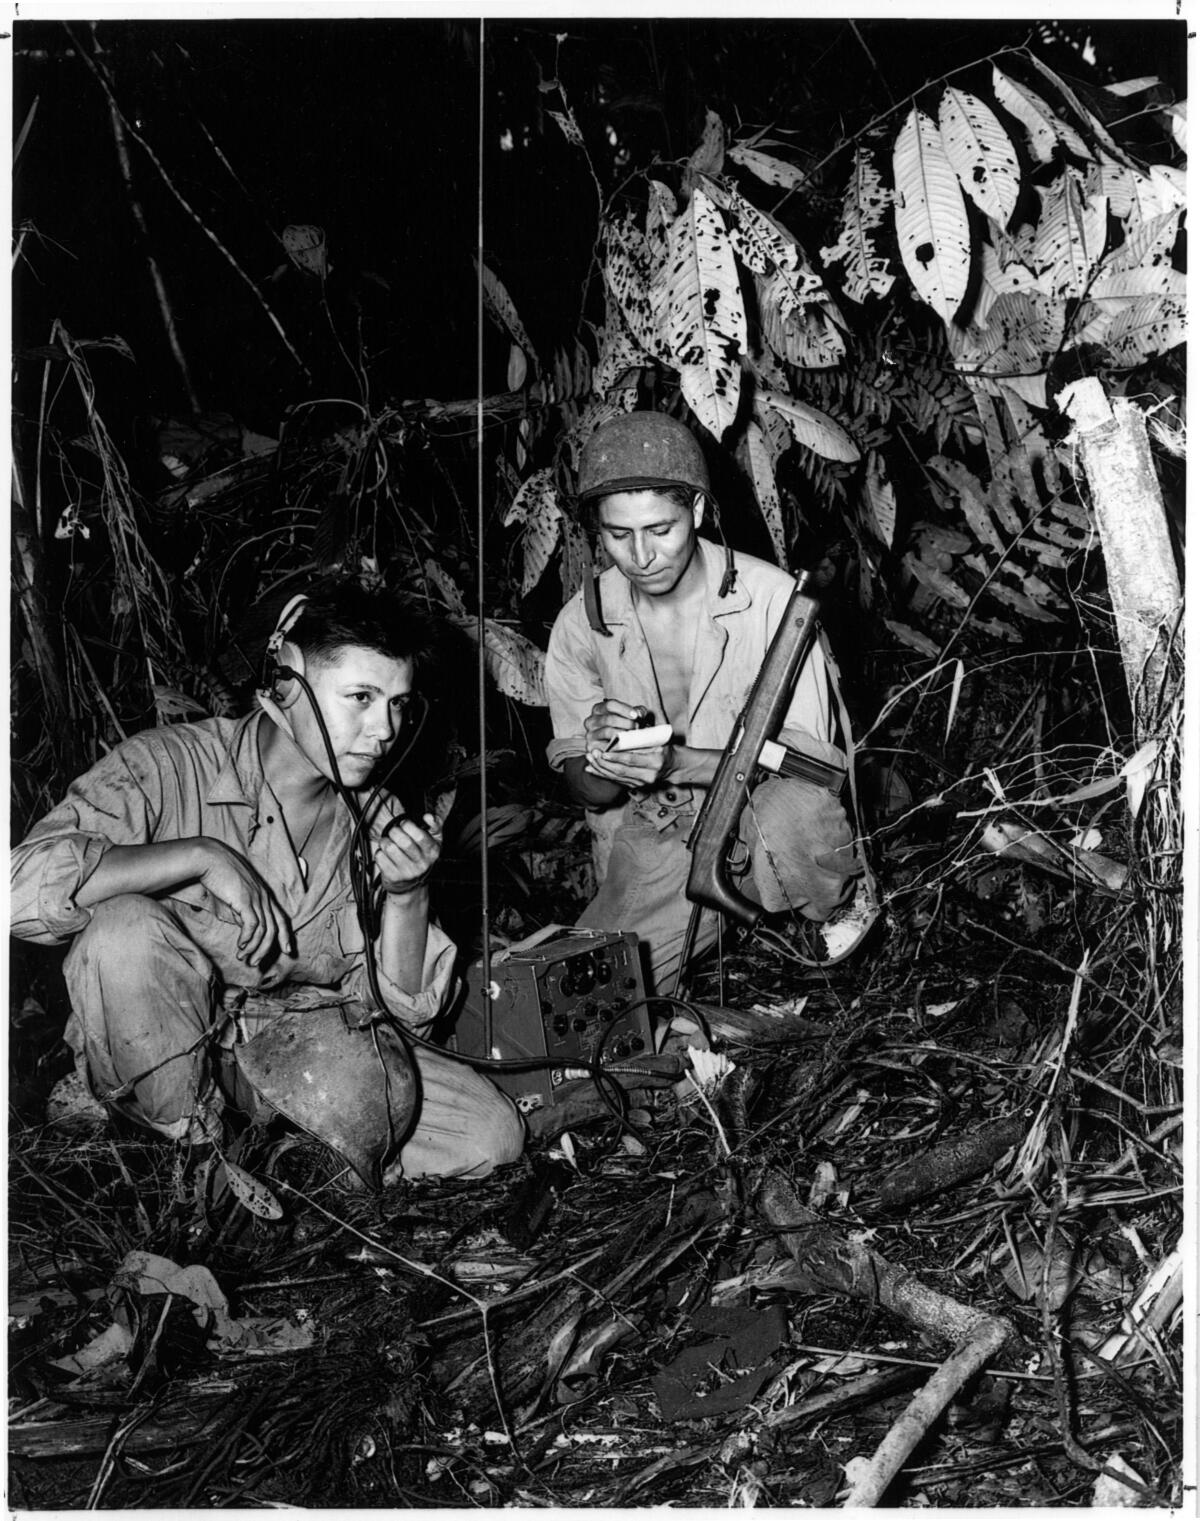 Navajo Code Talkers Henry Bake, Jr., and George Kirk, operate a radio in a jungle during World War II.